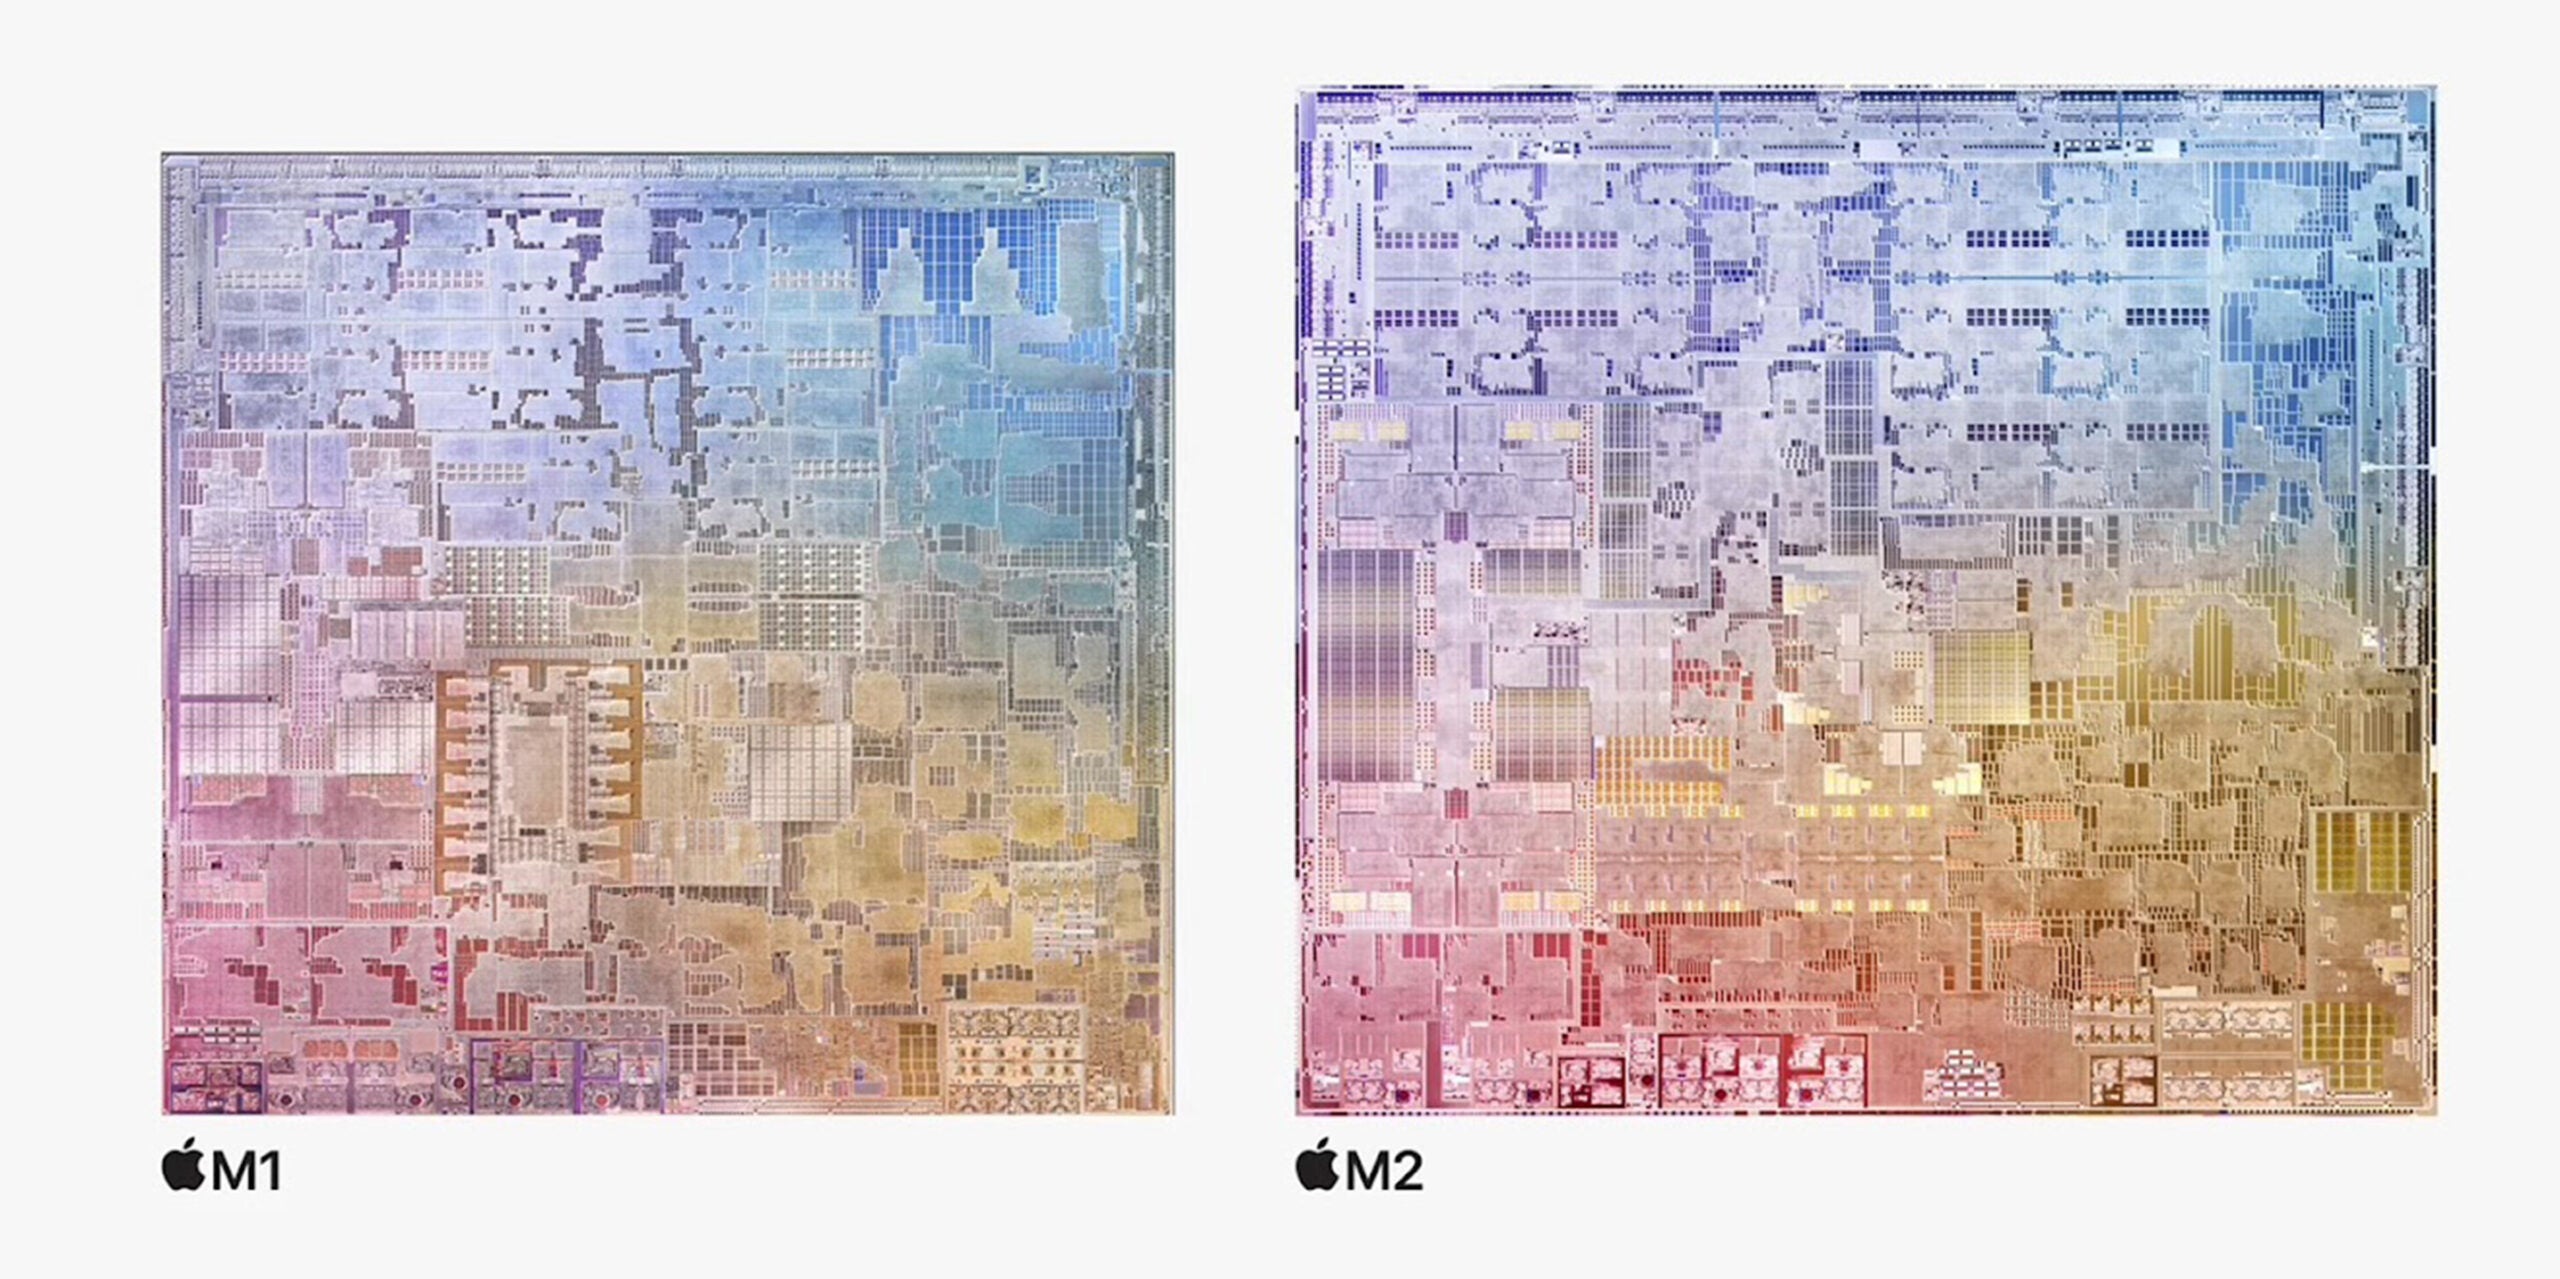 The M2’s 20 billion transistors need more space than the M1’s dimensions